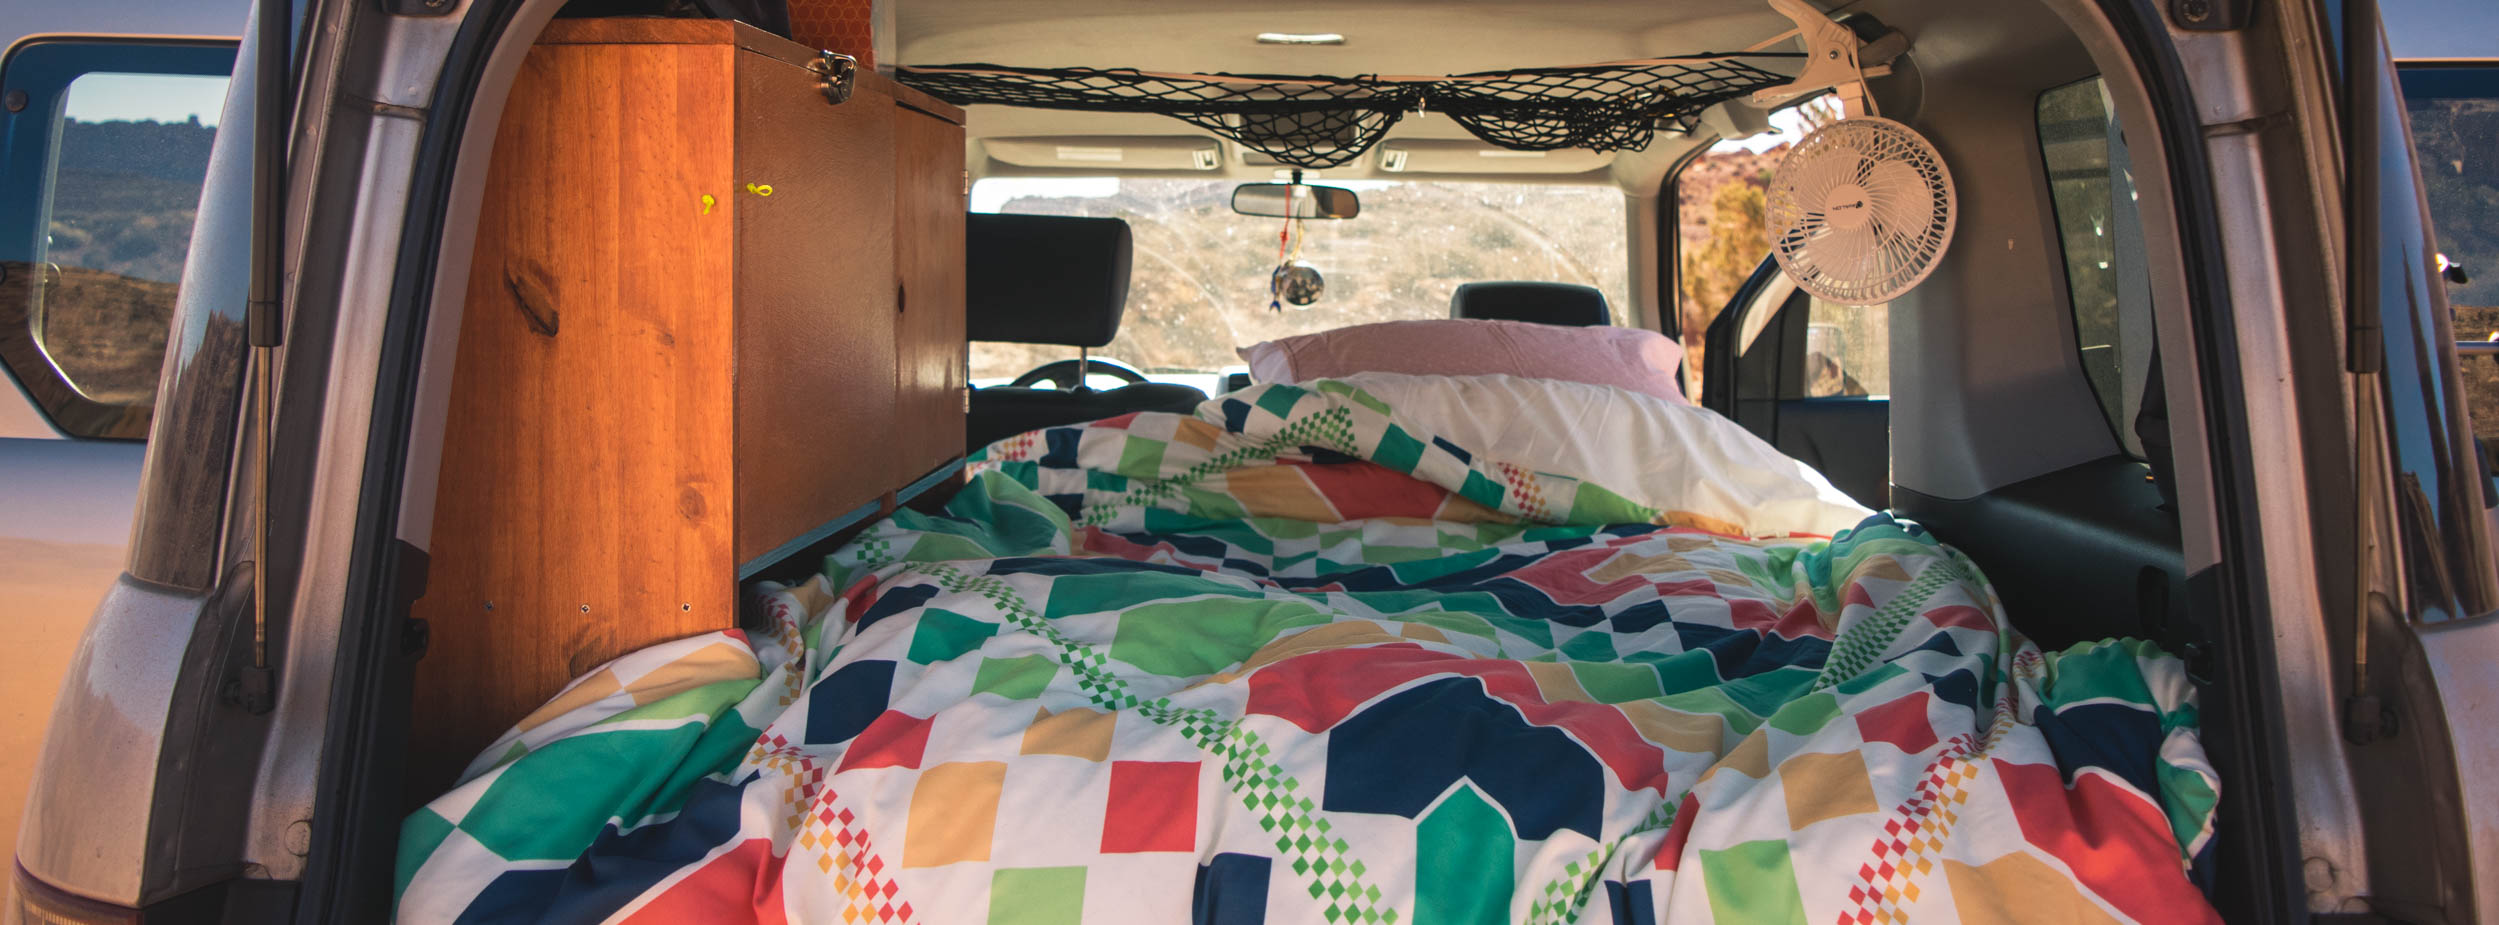 Everything About My Honda Element Camper Conversion Ethan